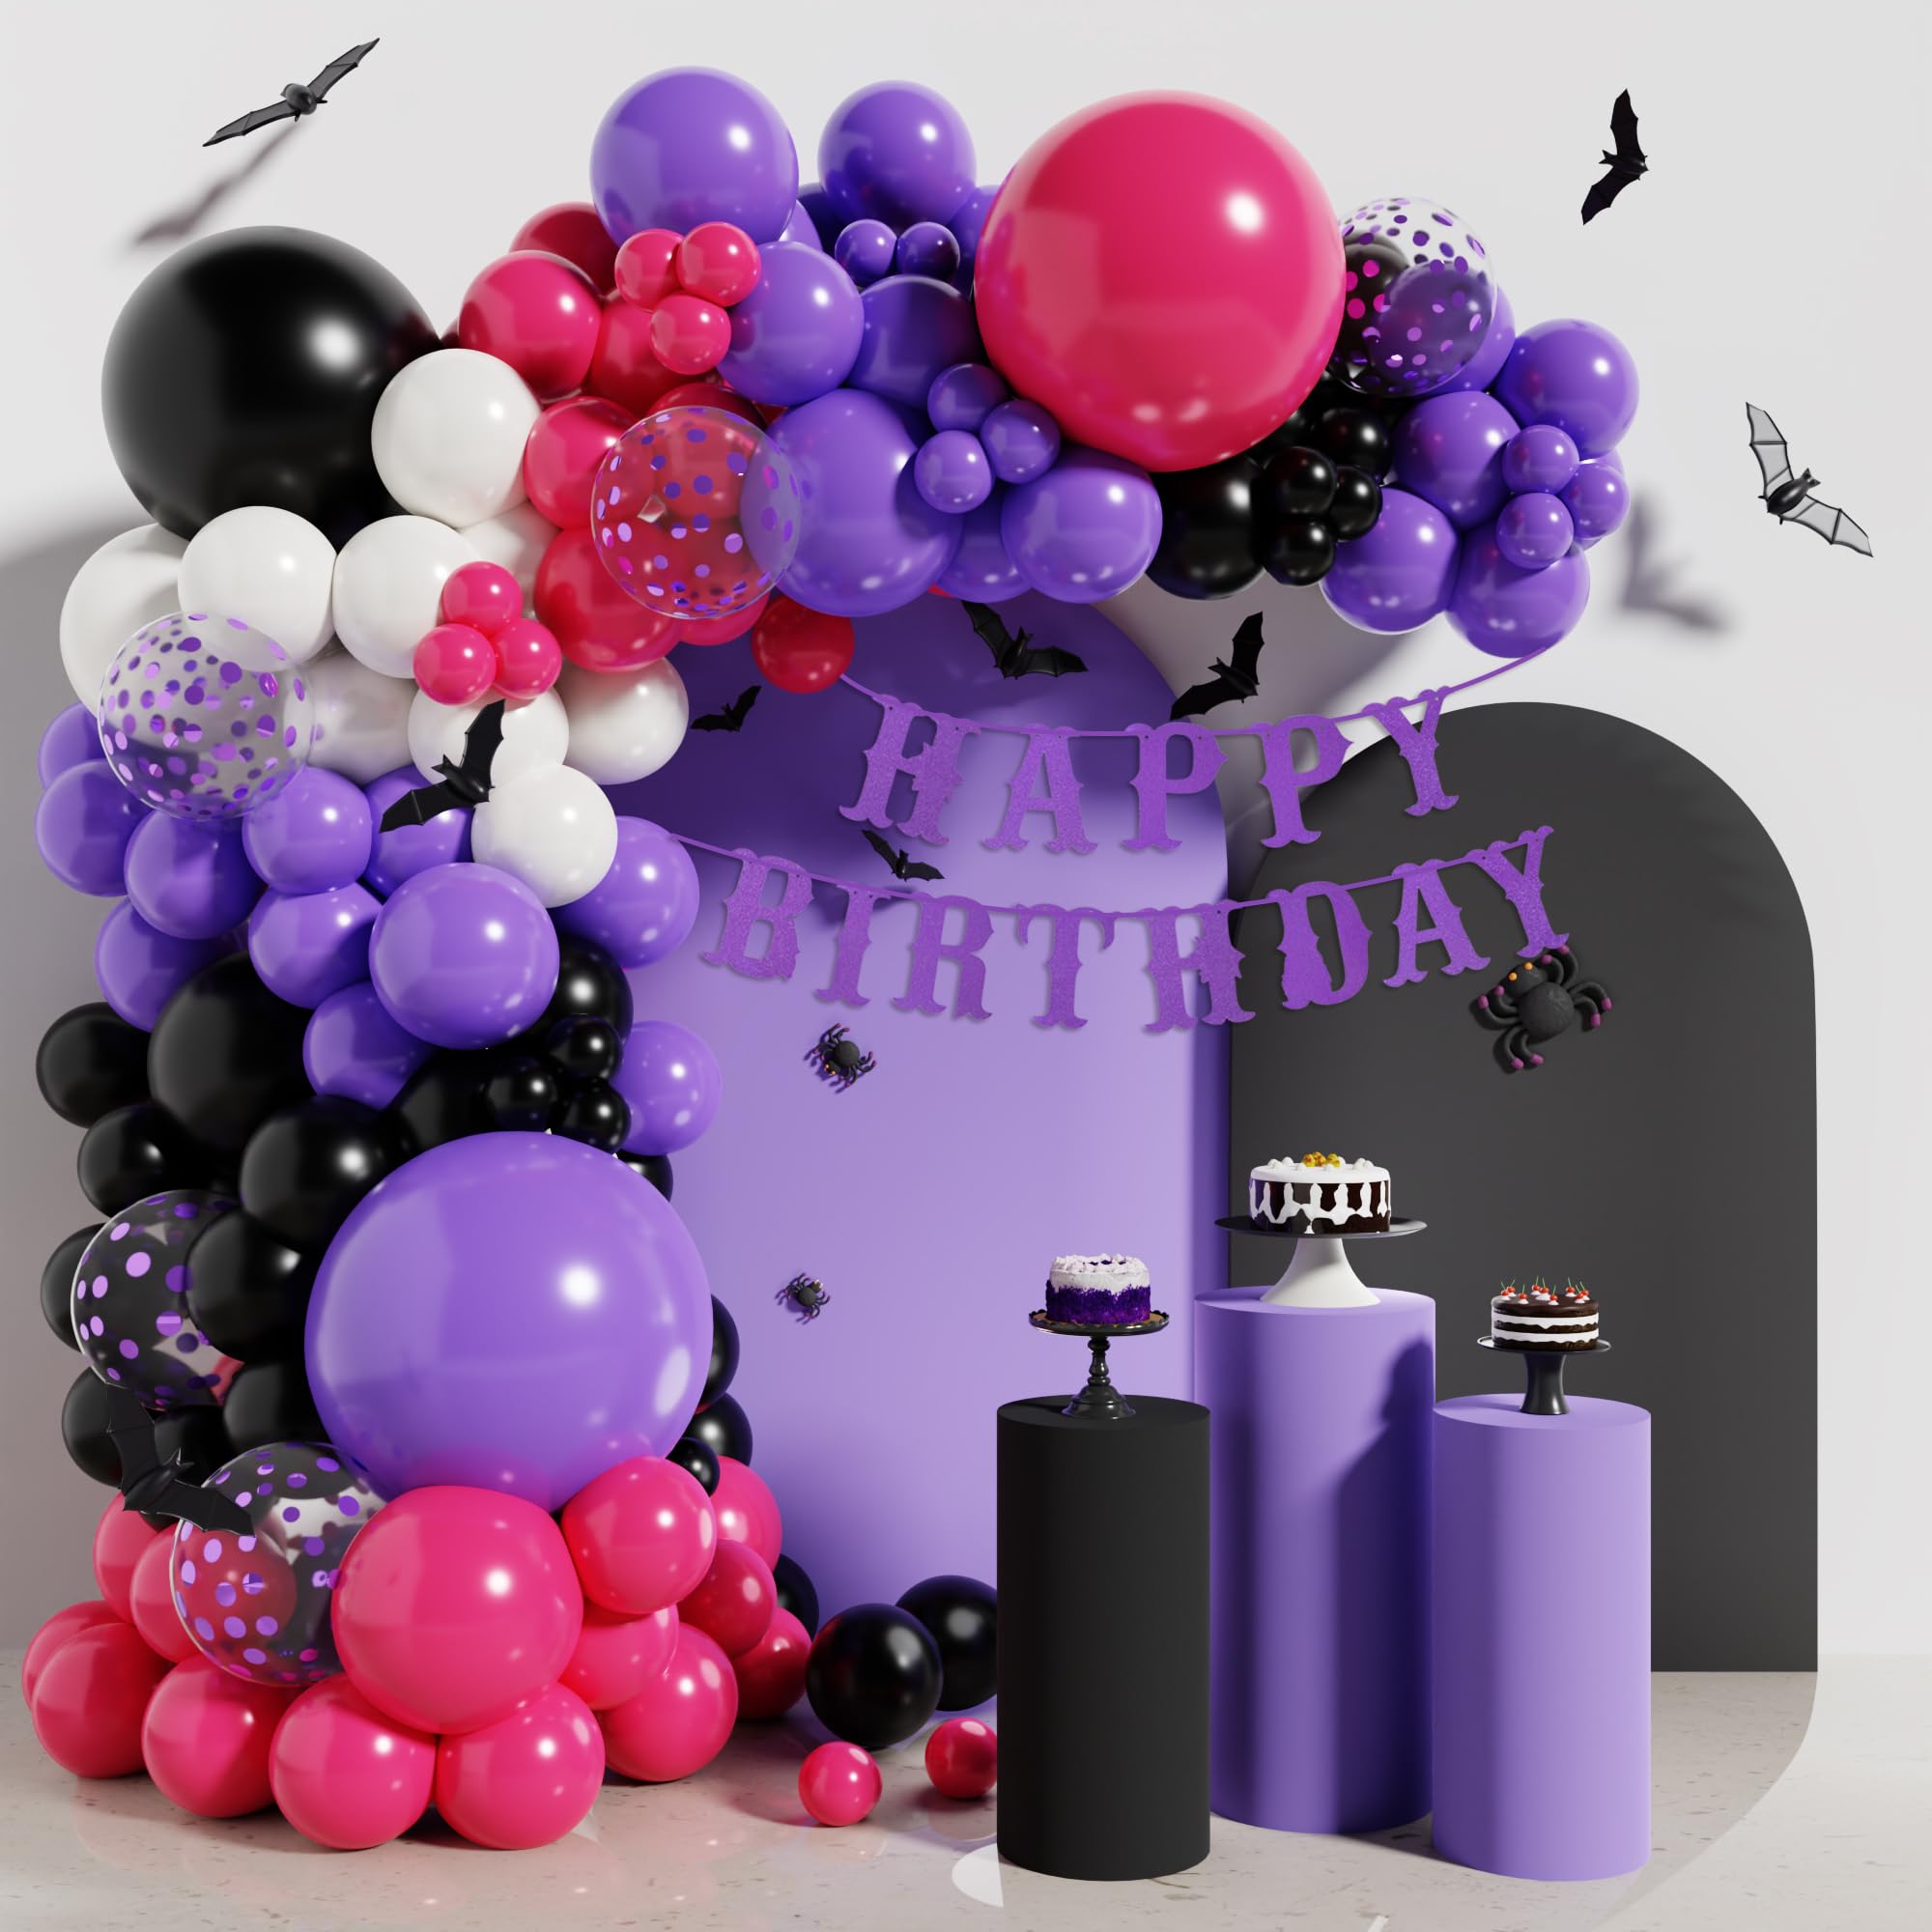 Wednesday Balloons Garland Arch Kit, 123Pcs TV Drama Black Purple Rose Red Balloon Happy Birthday Banner for Wednesday Gothic Theme Birthday Party Supplies Decorations Halloween Party Favors